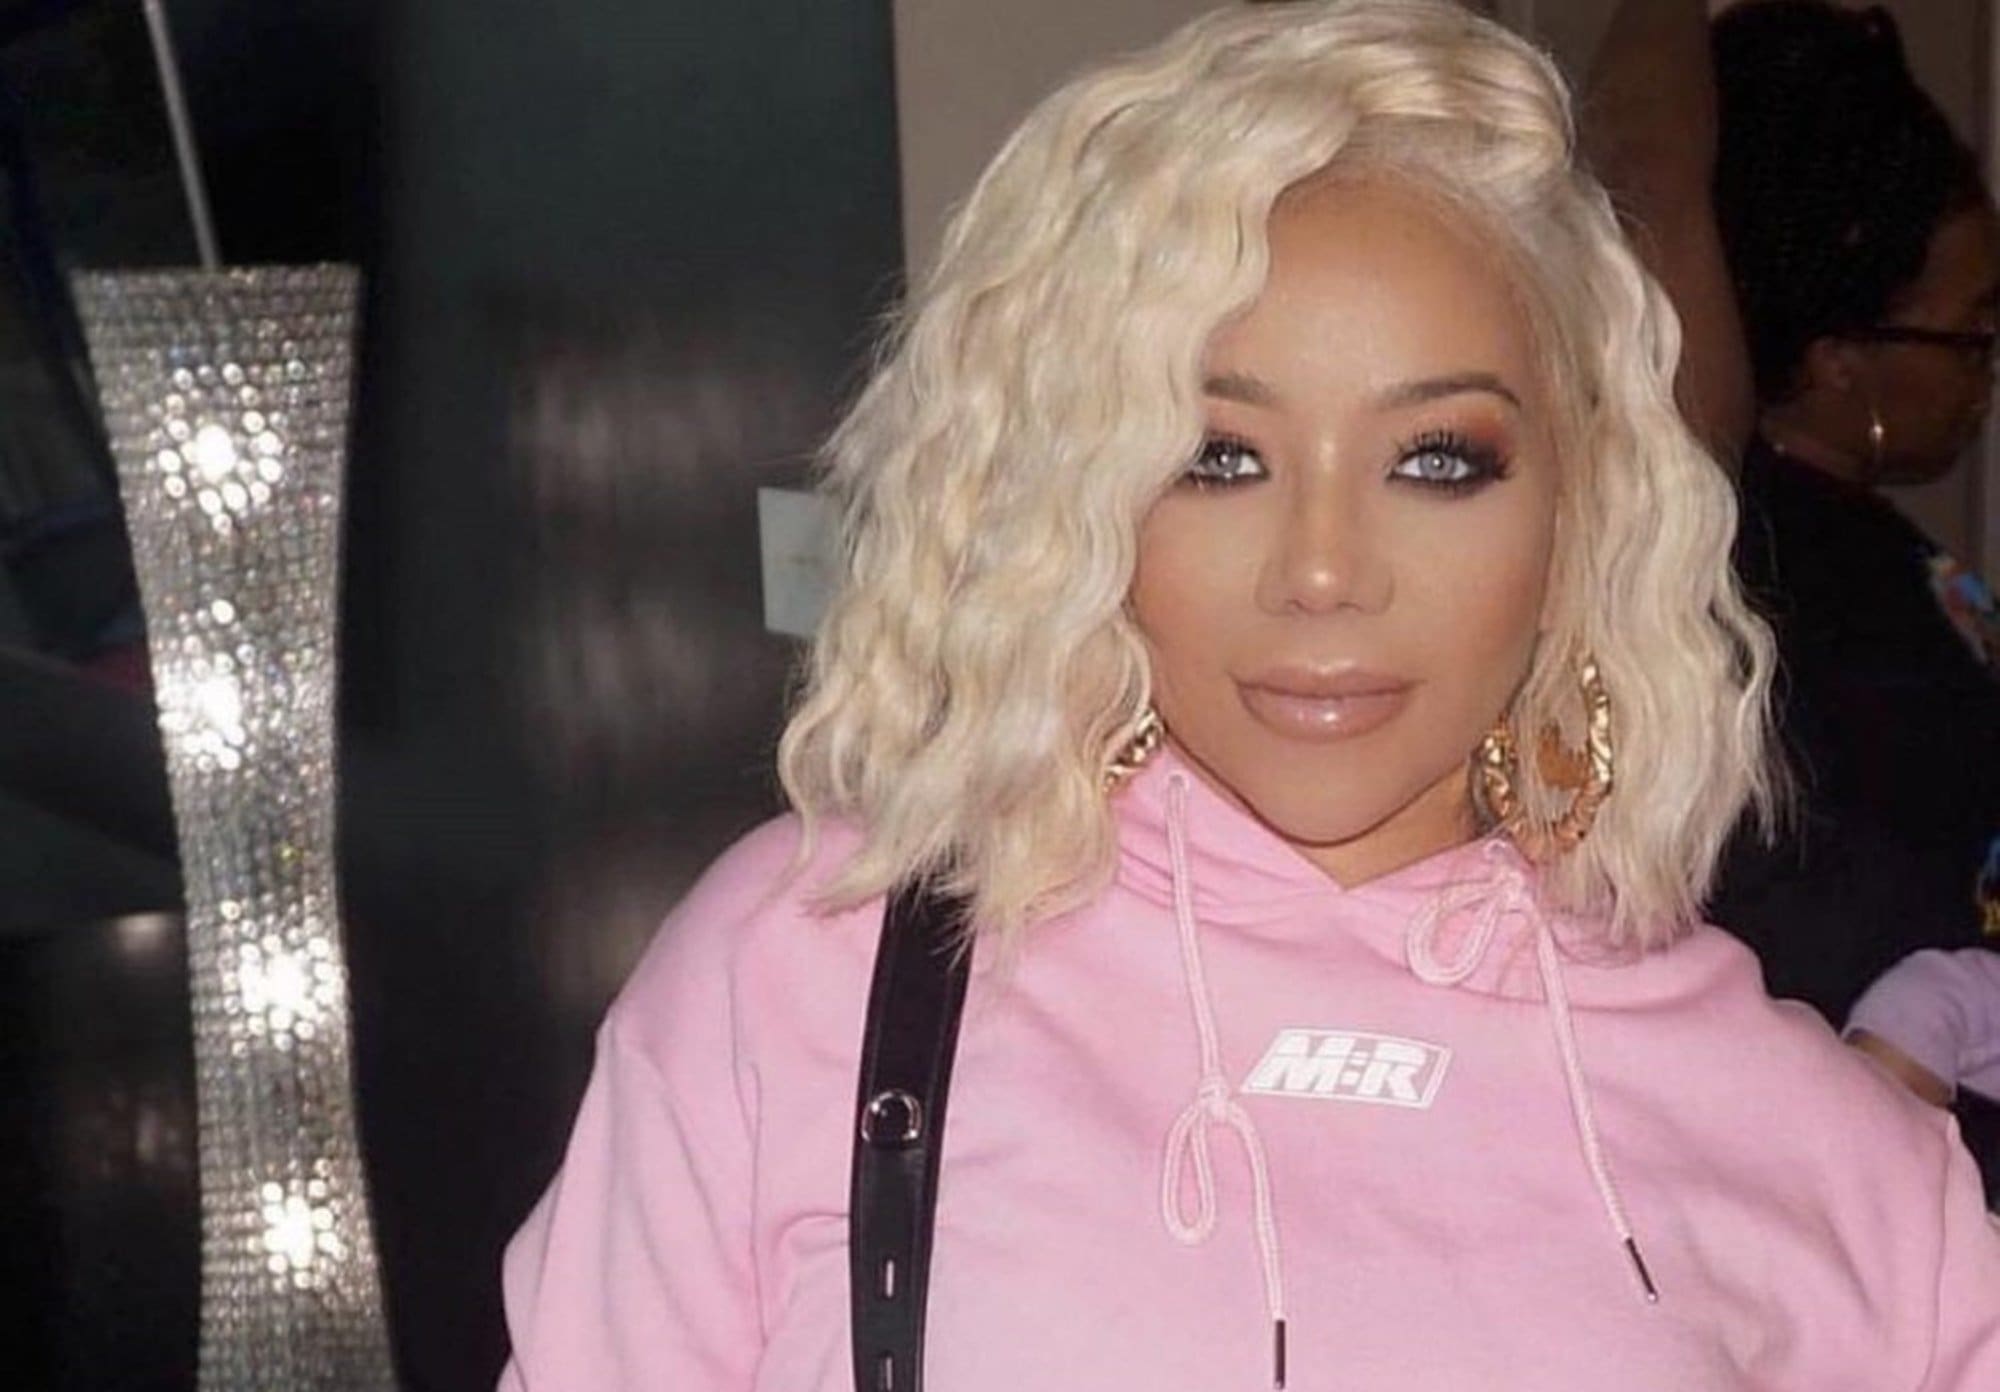 Tiny Harris Shares A Video From Her Thanksgiving Family Gathering - Watch It Here